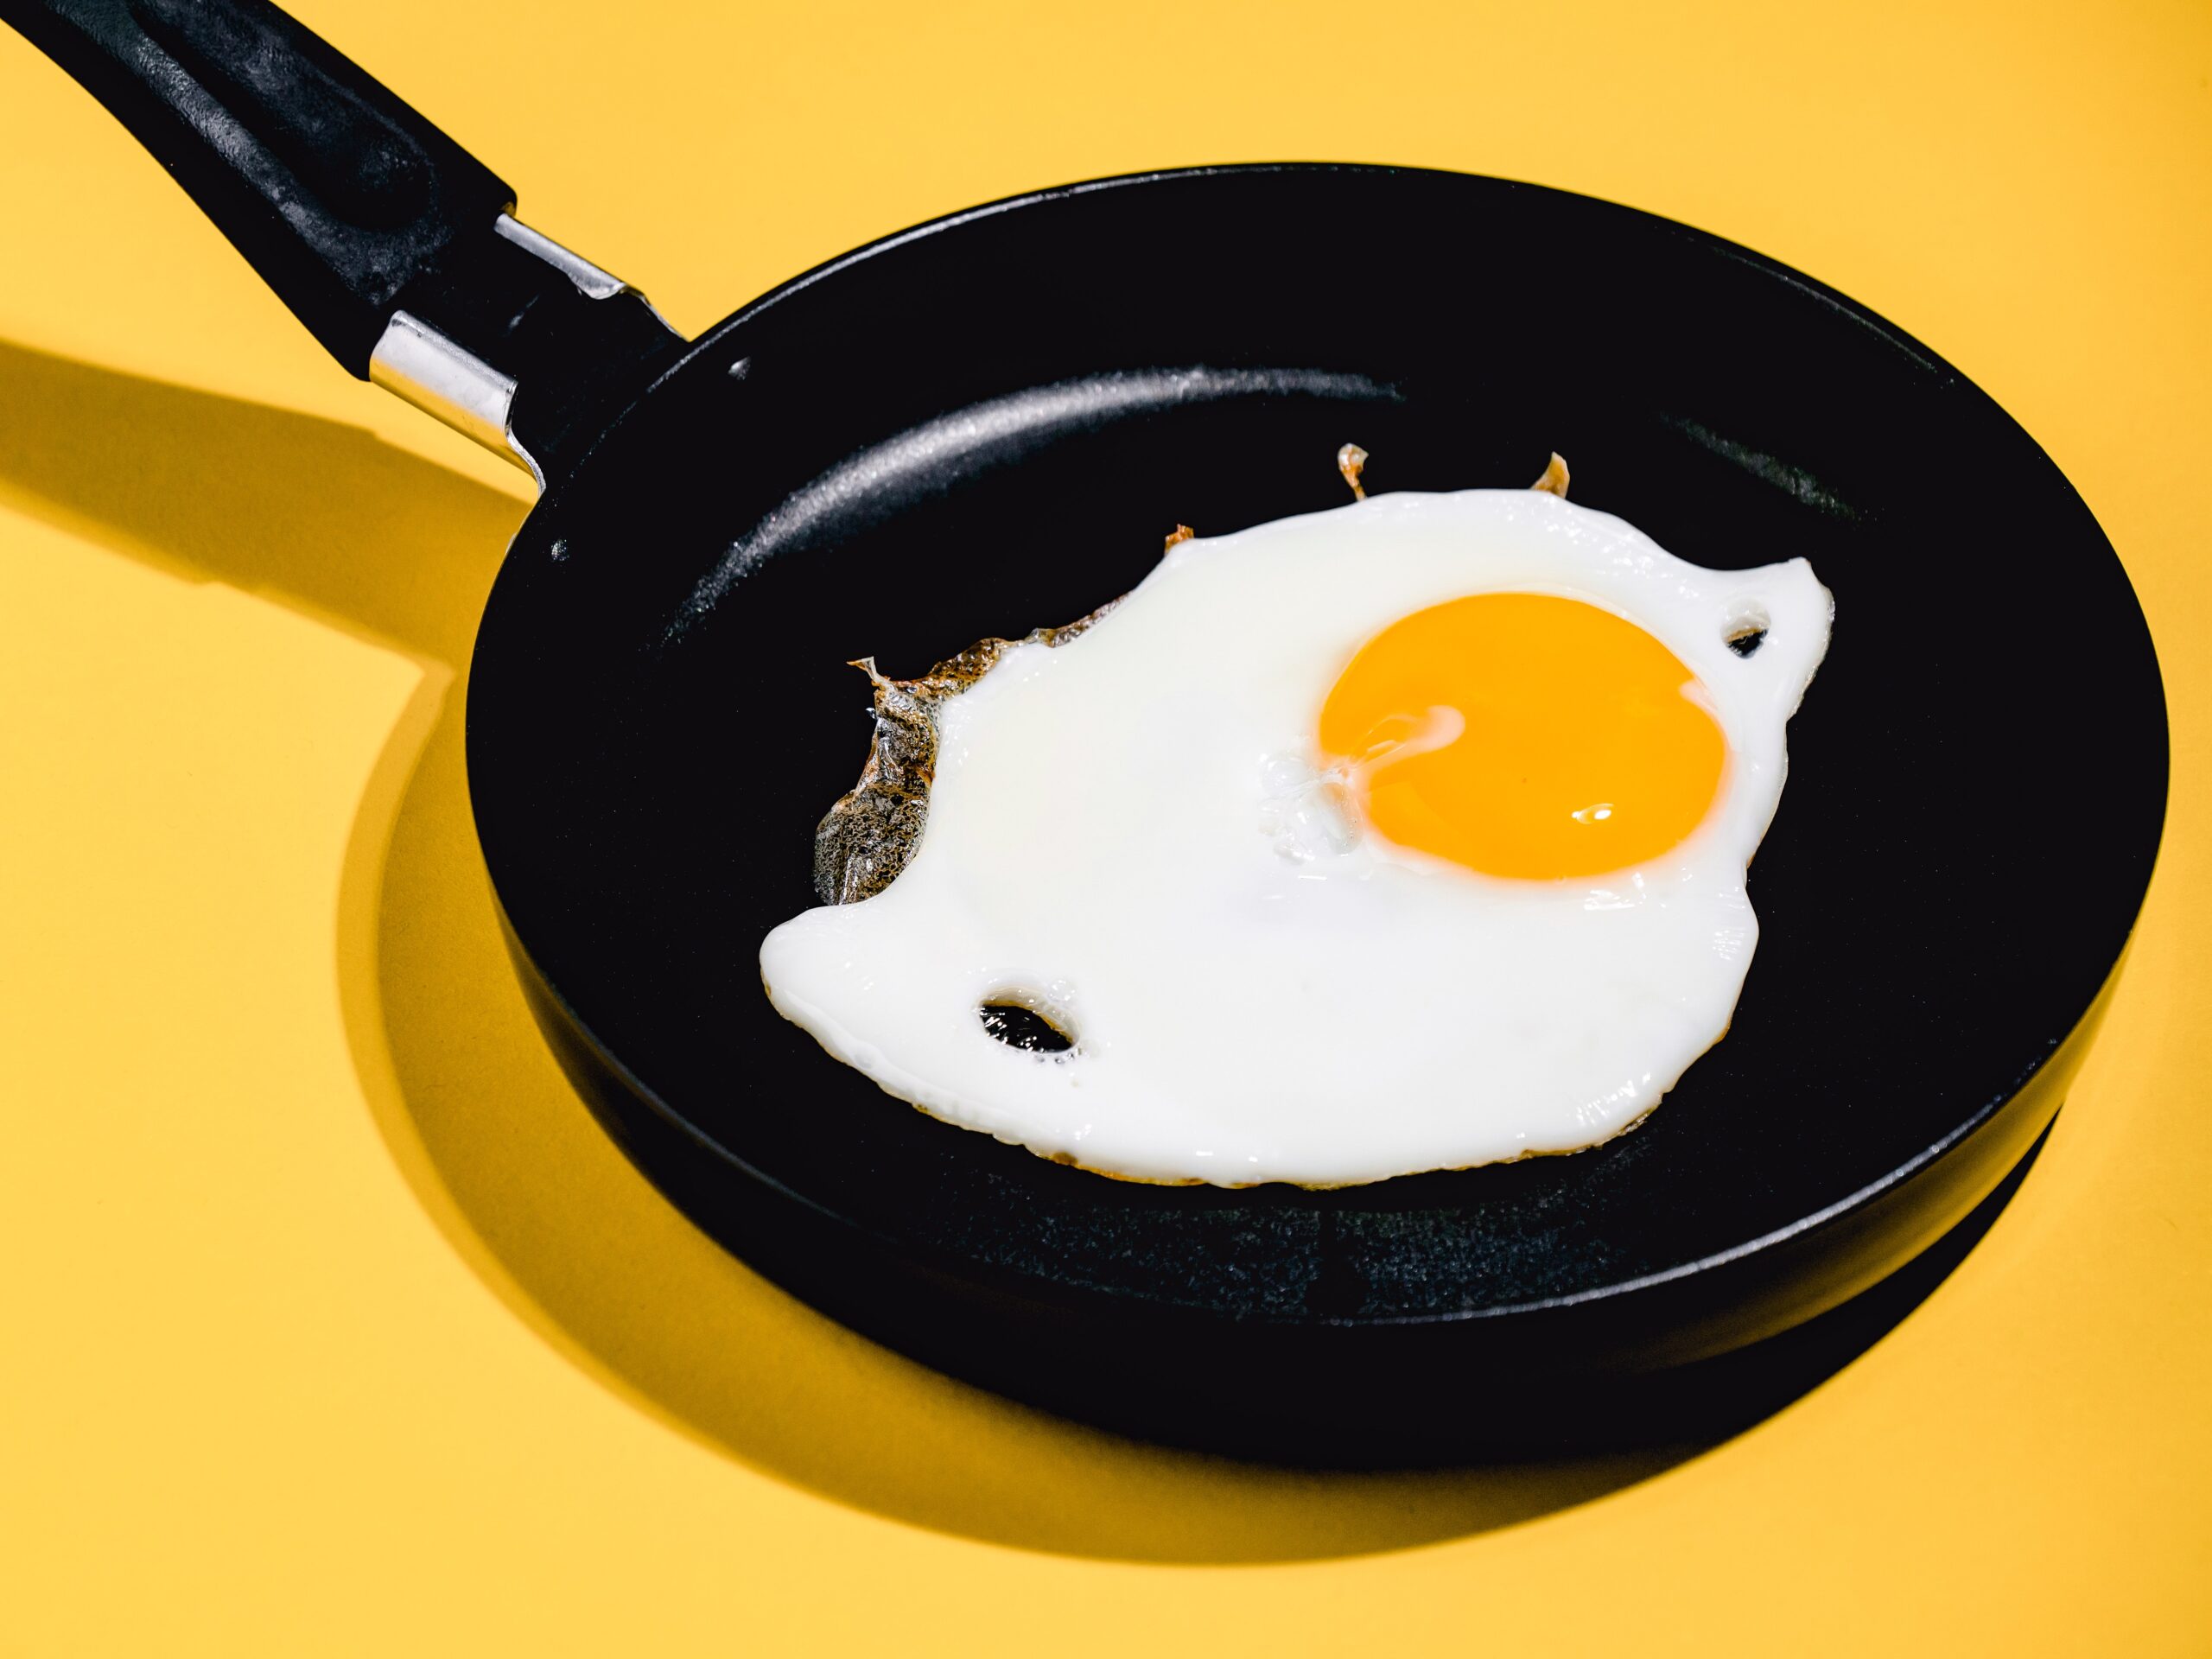 For Flawless Fried Eggs, Begin With a Chilly Pan